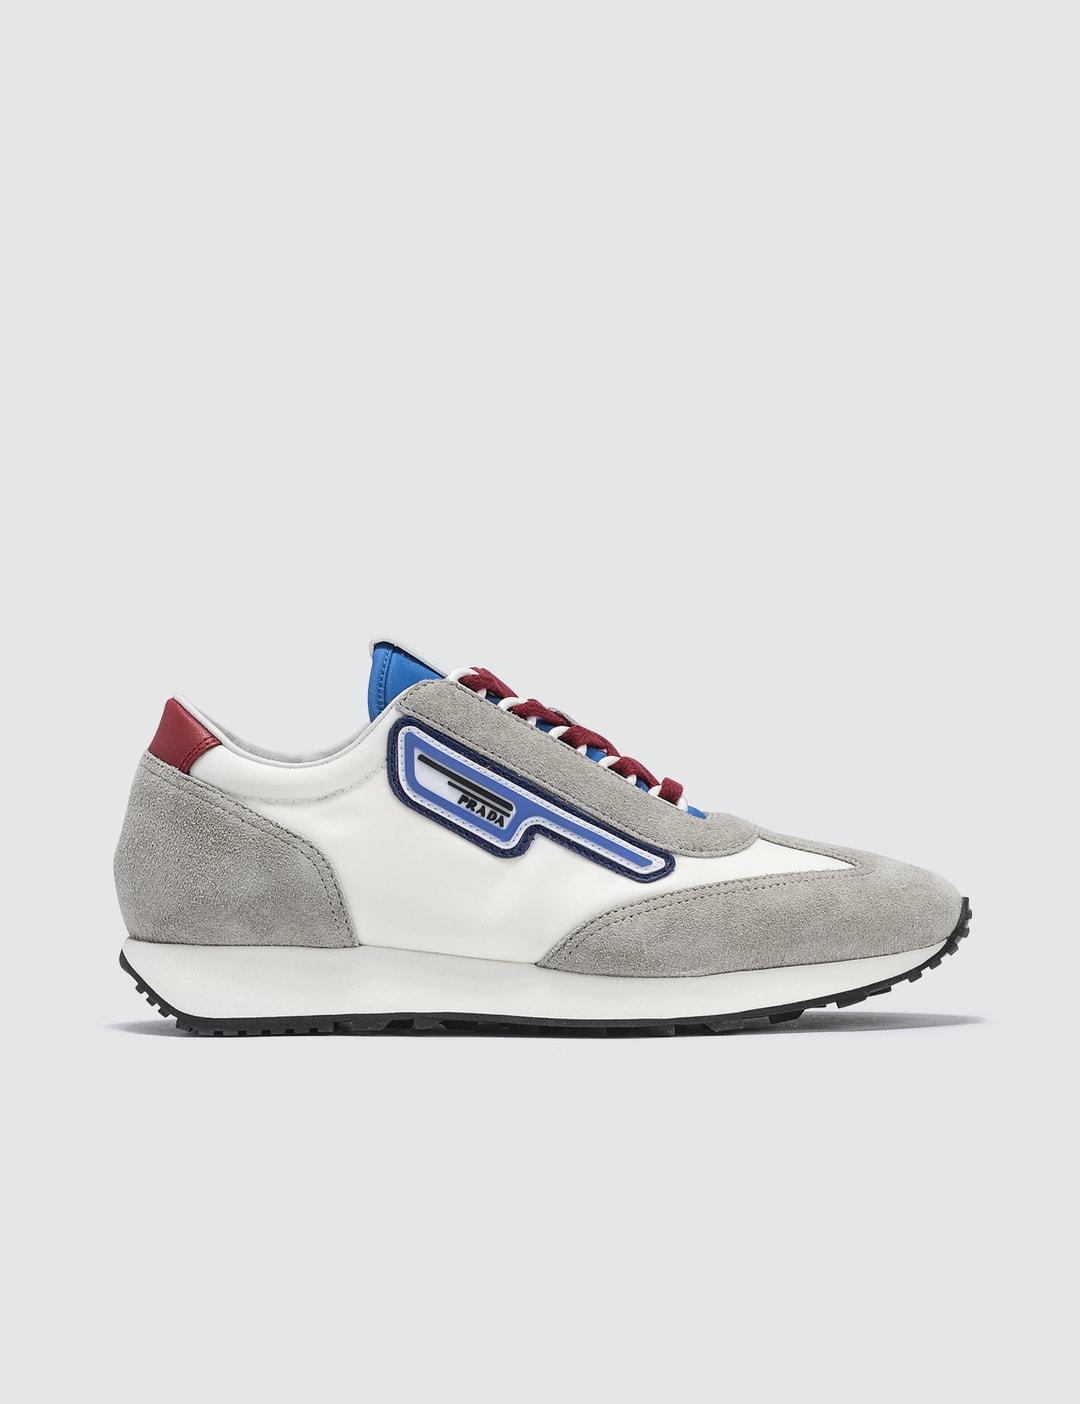 Prada - Suede And Nylon Retro Sneakers | HBX - Globally Curated Fashion and  Lifestyle by Hypebeast